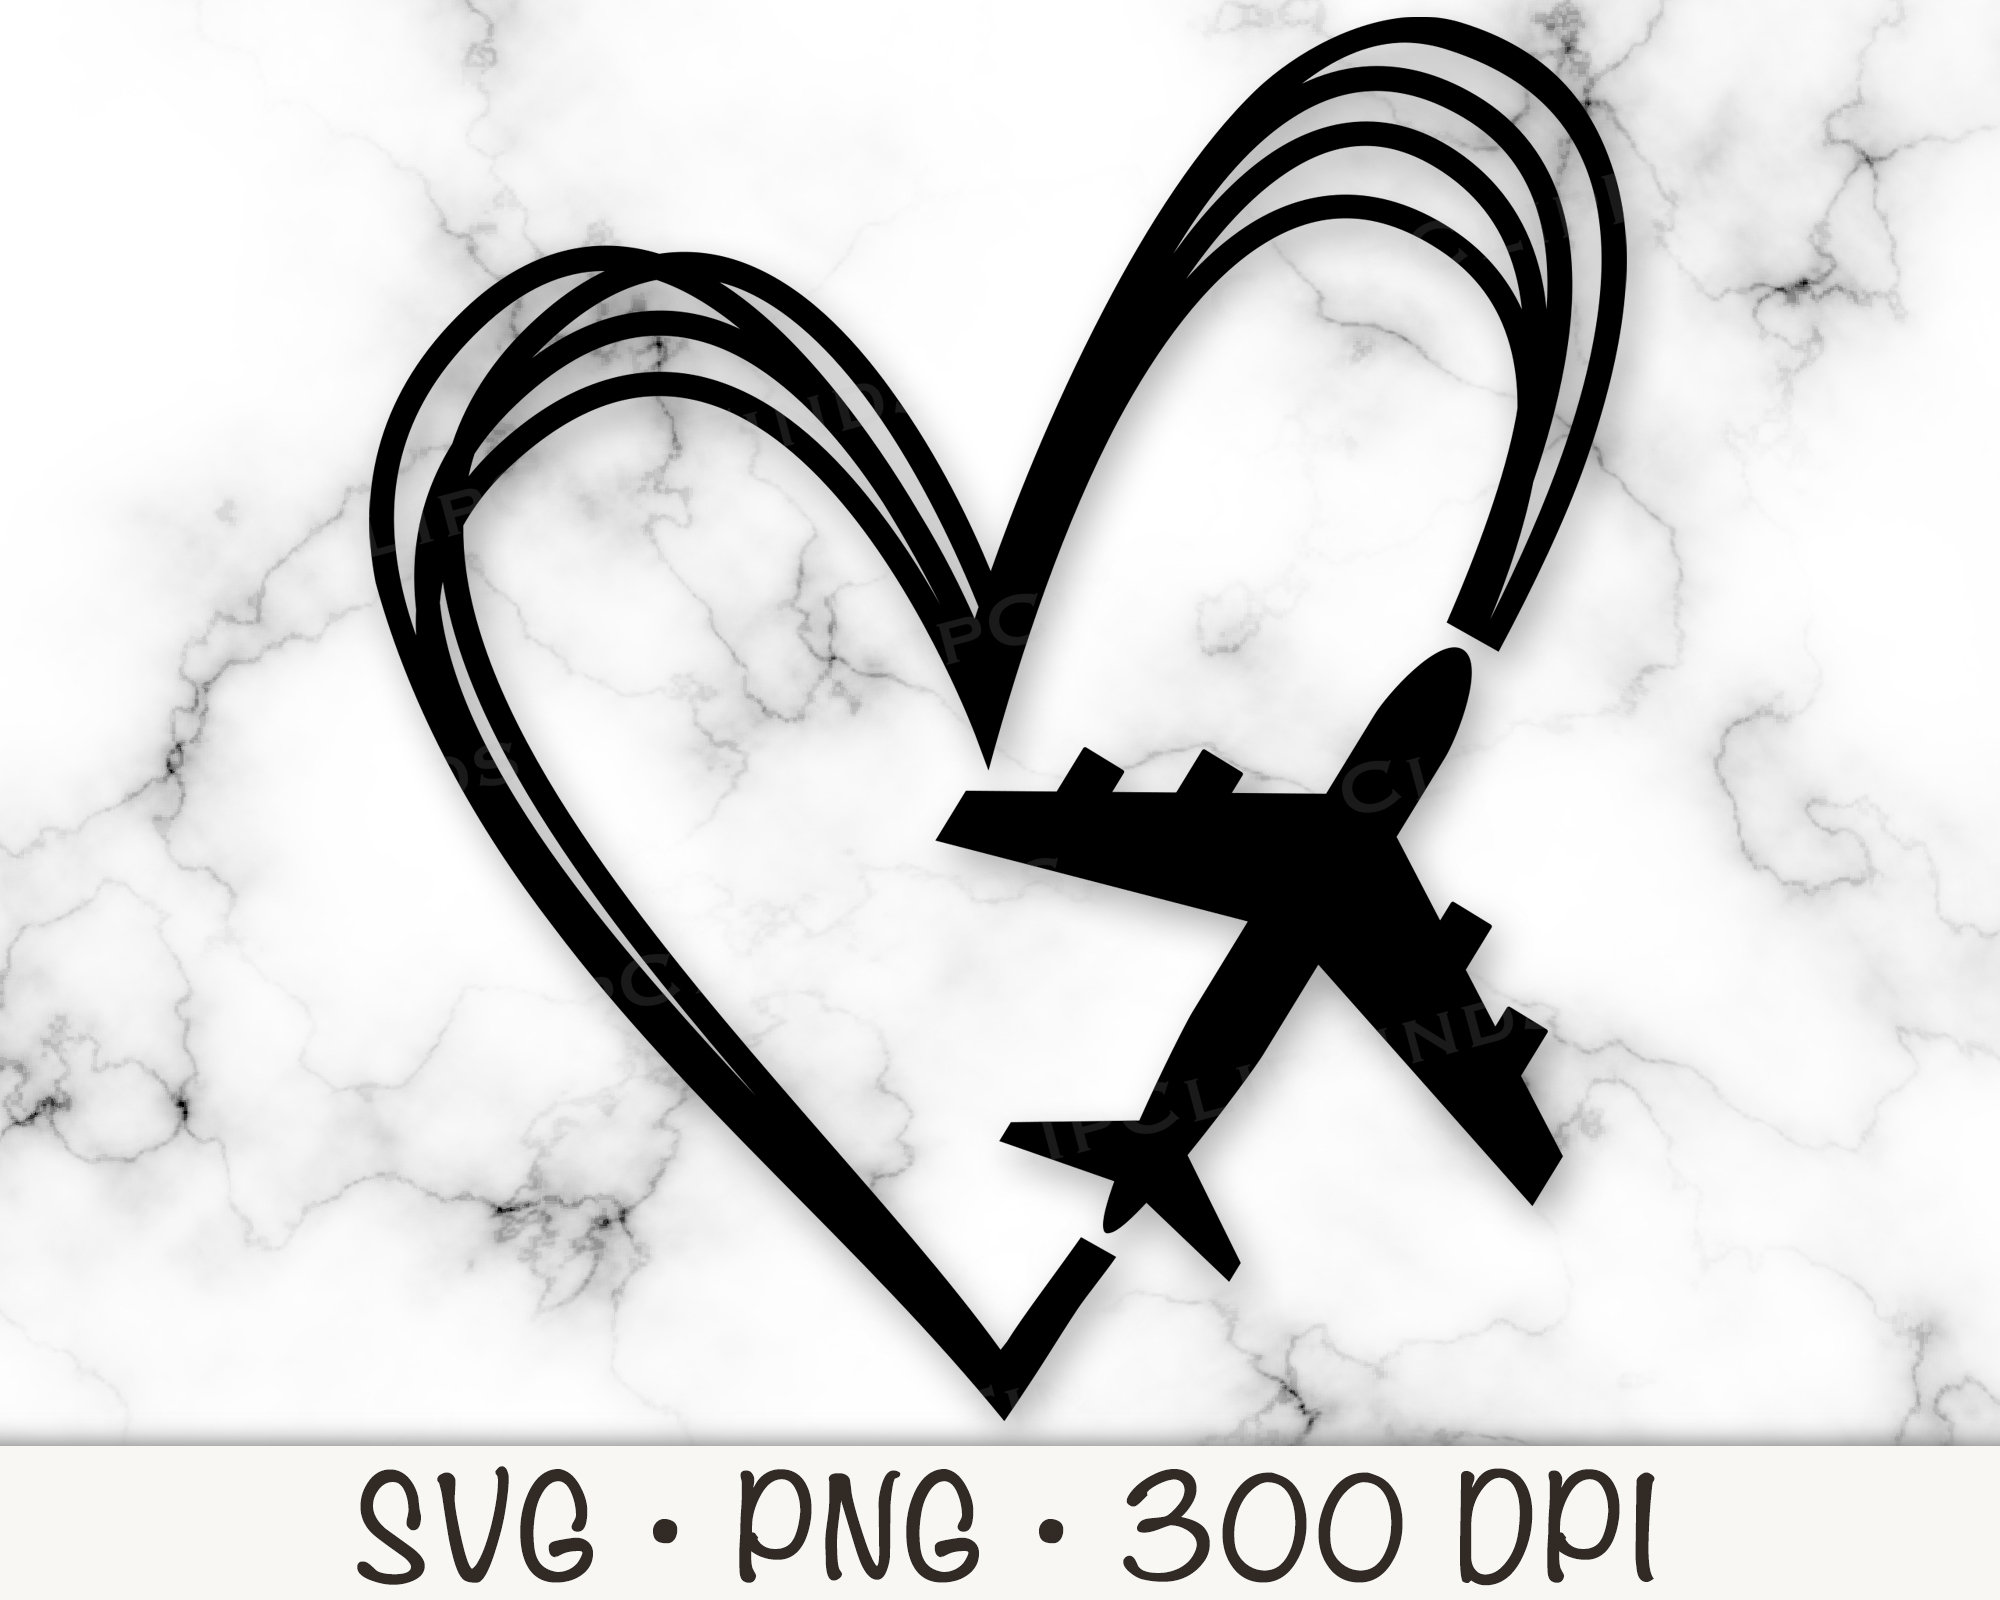 Airplane Heart, Heart Outline Airplane, Love Travel, Love Flying, Airplane  Heart Monogram, Vacation Trip, SVG, PNG, Instant Digital Download 